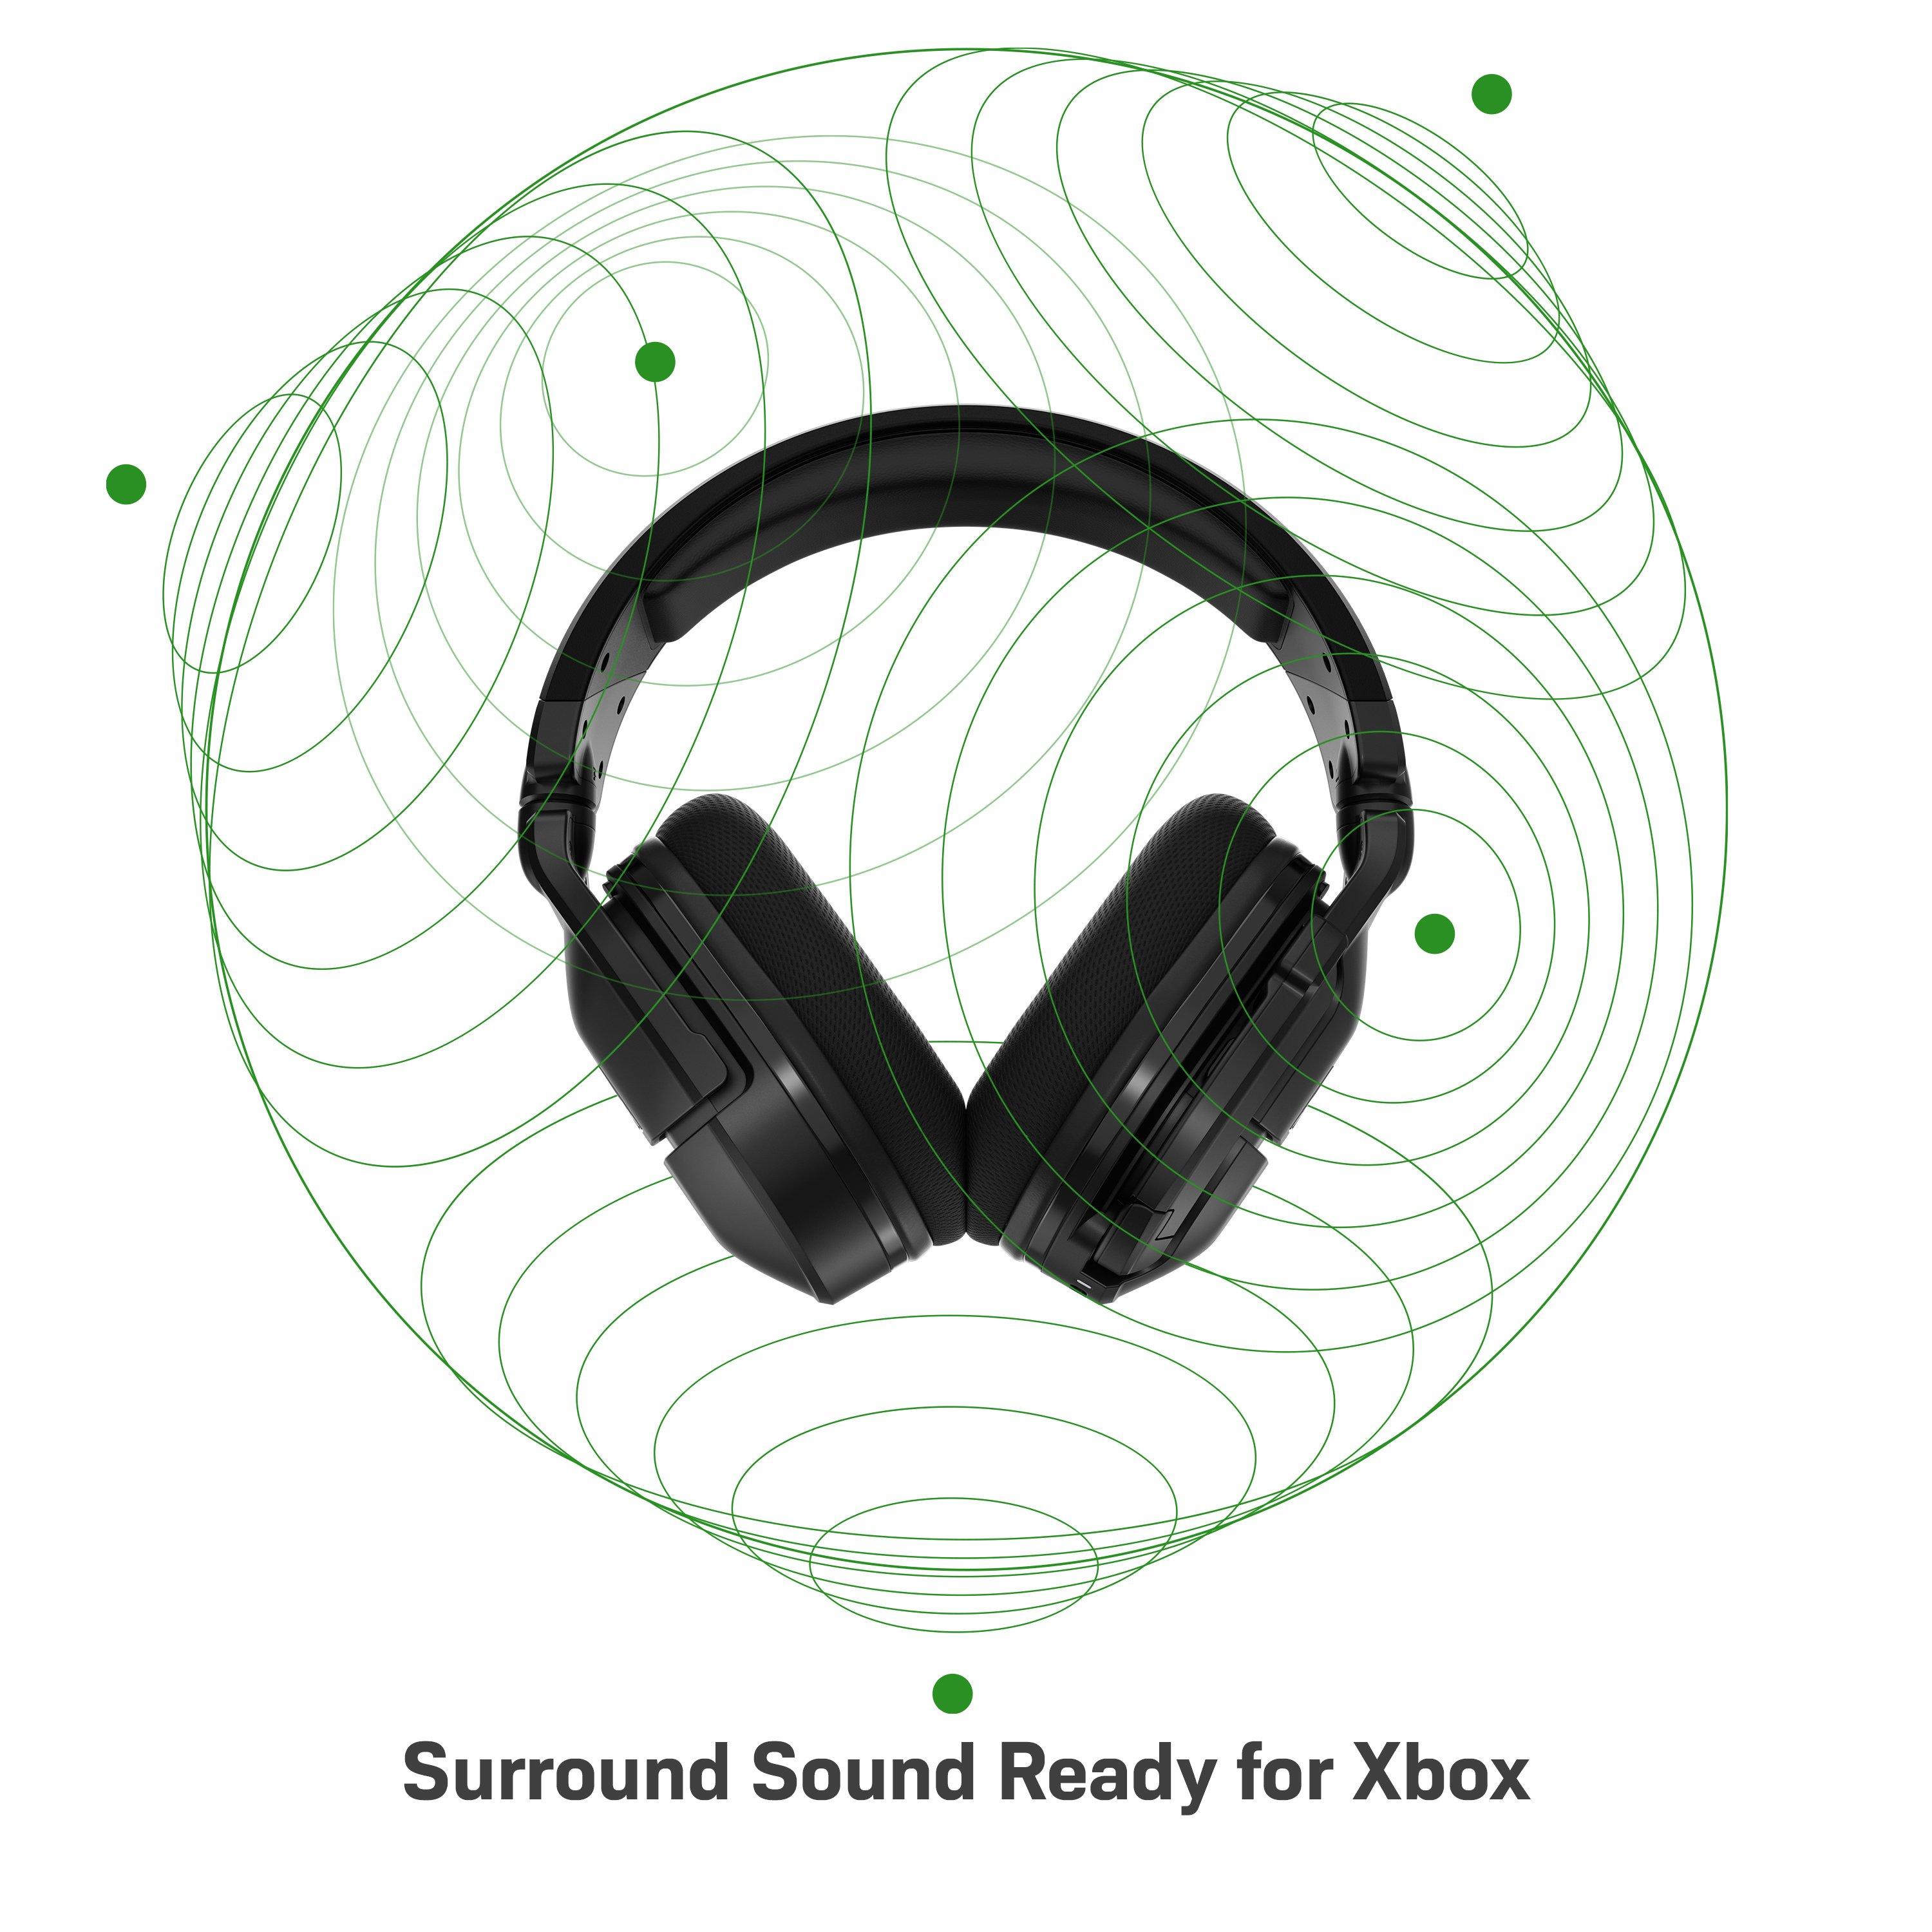 Turtle Beach Stealth 600 Gen 2 MAX Universal Wireless Gaming Headset (Designed for Xbox) - Xbox Series X